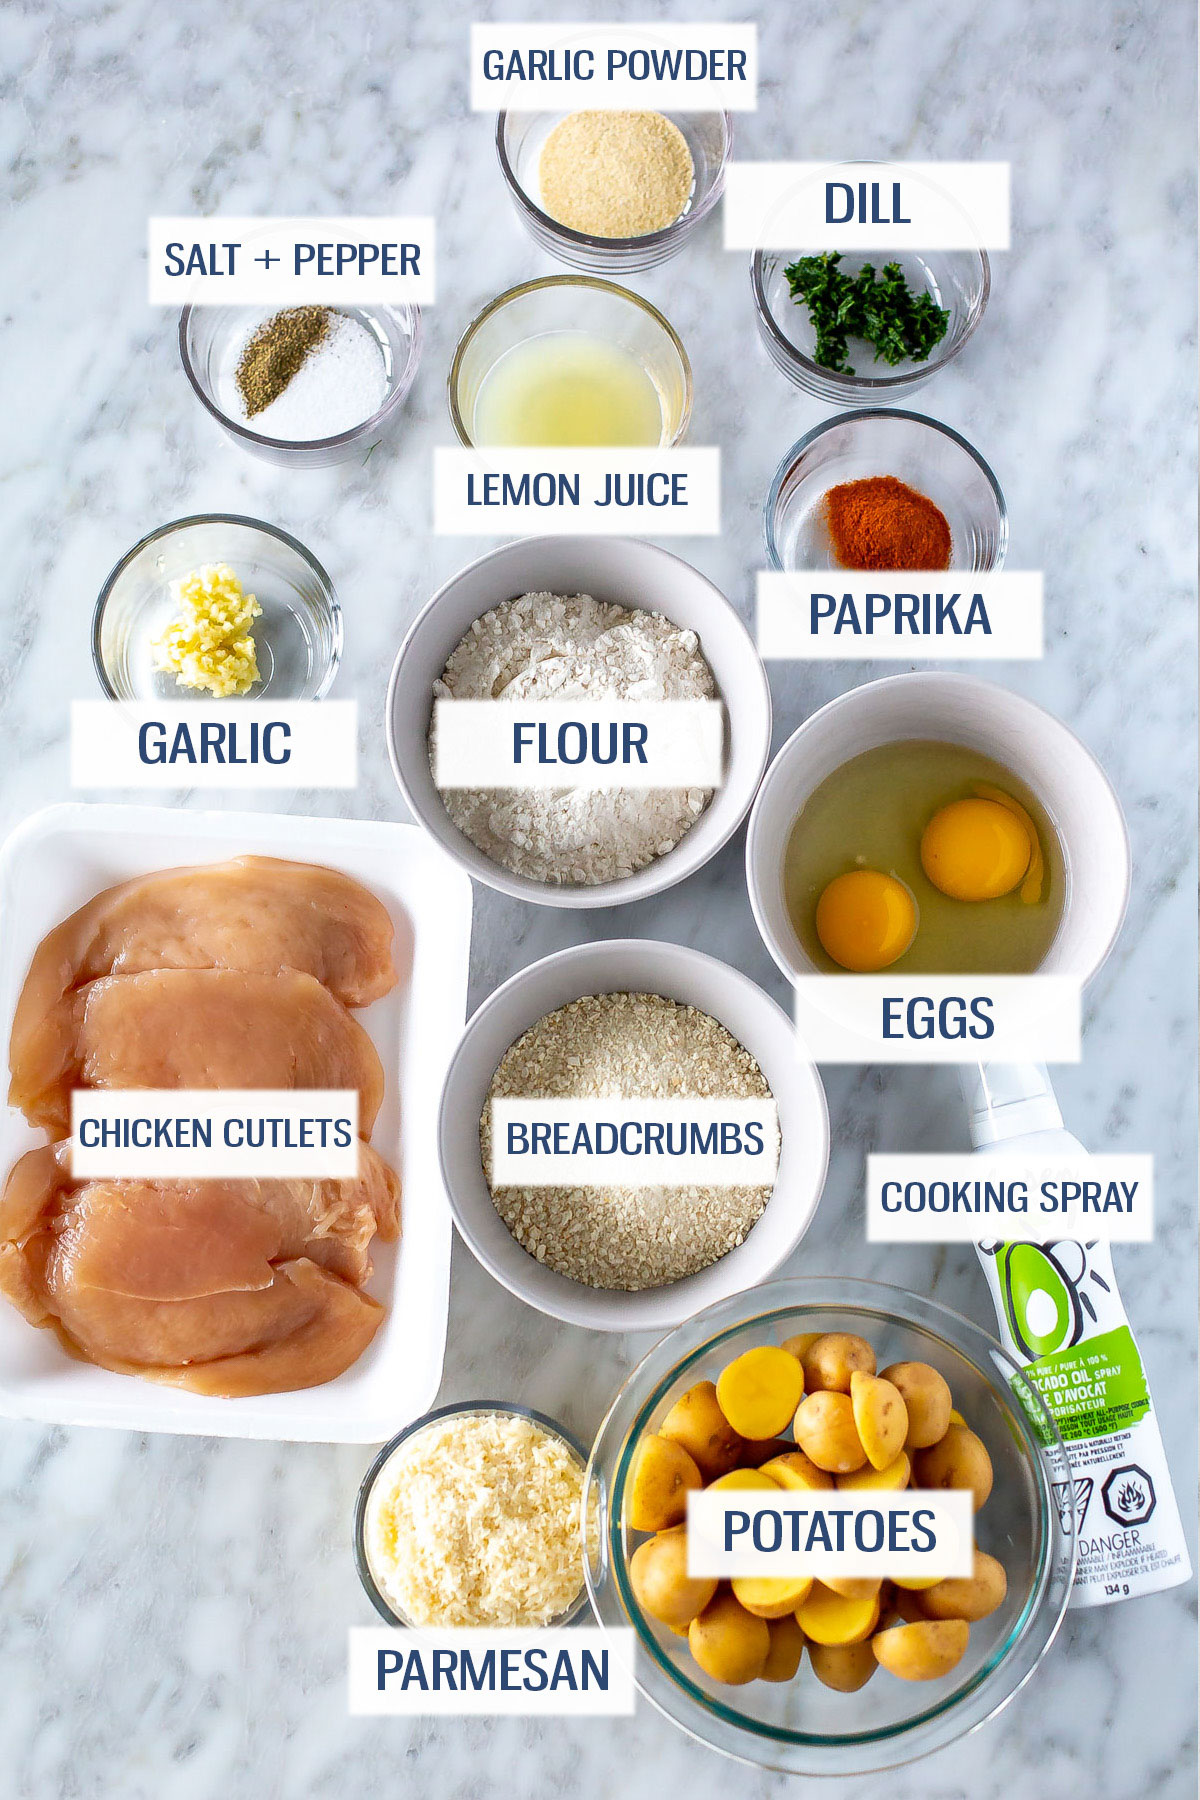 Ingredients for chicken cutlets and lemon dill potatoes: garlic powder, dill, lemon juice, paprika, garlic, salt, pepper, flour, breadcrumbs, chicken cutlets, eggs, cooking spray, parmesan cheese, and potatoes.